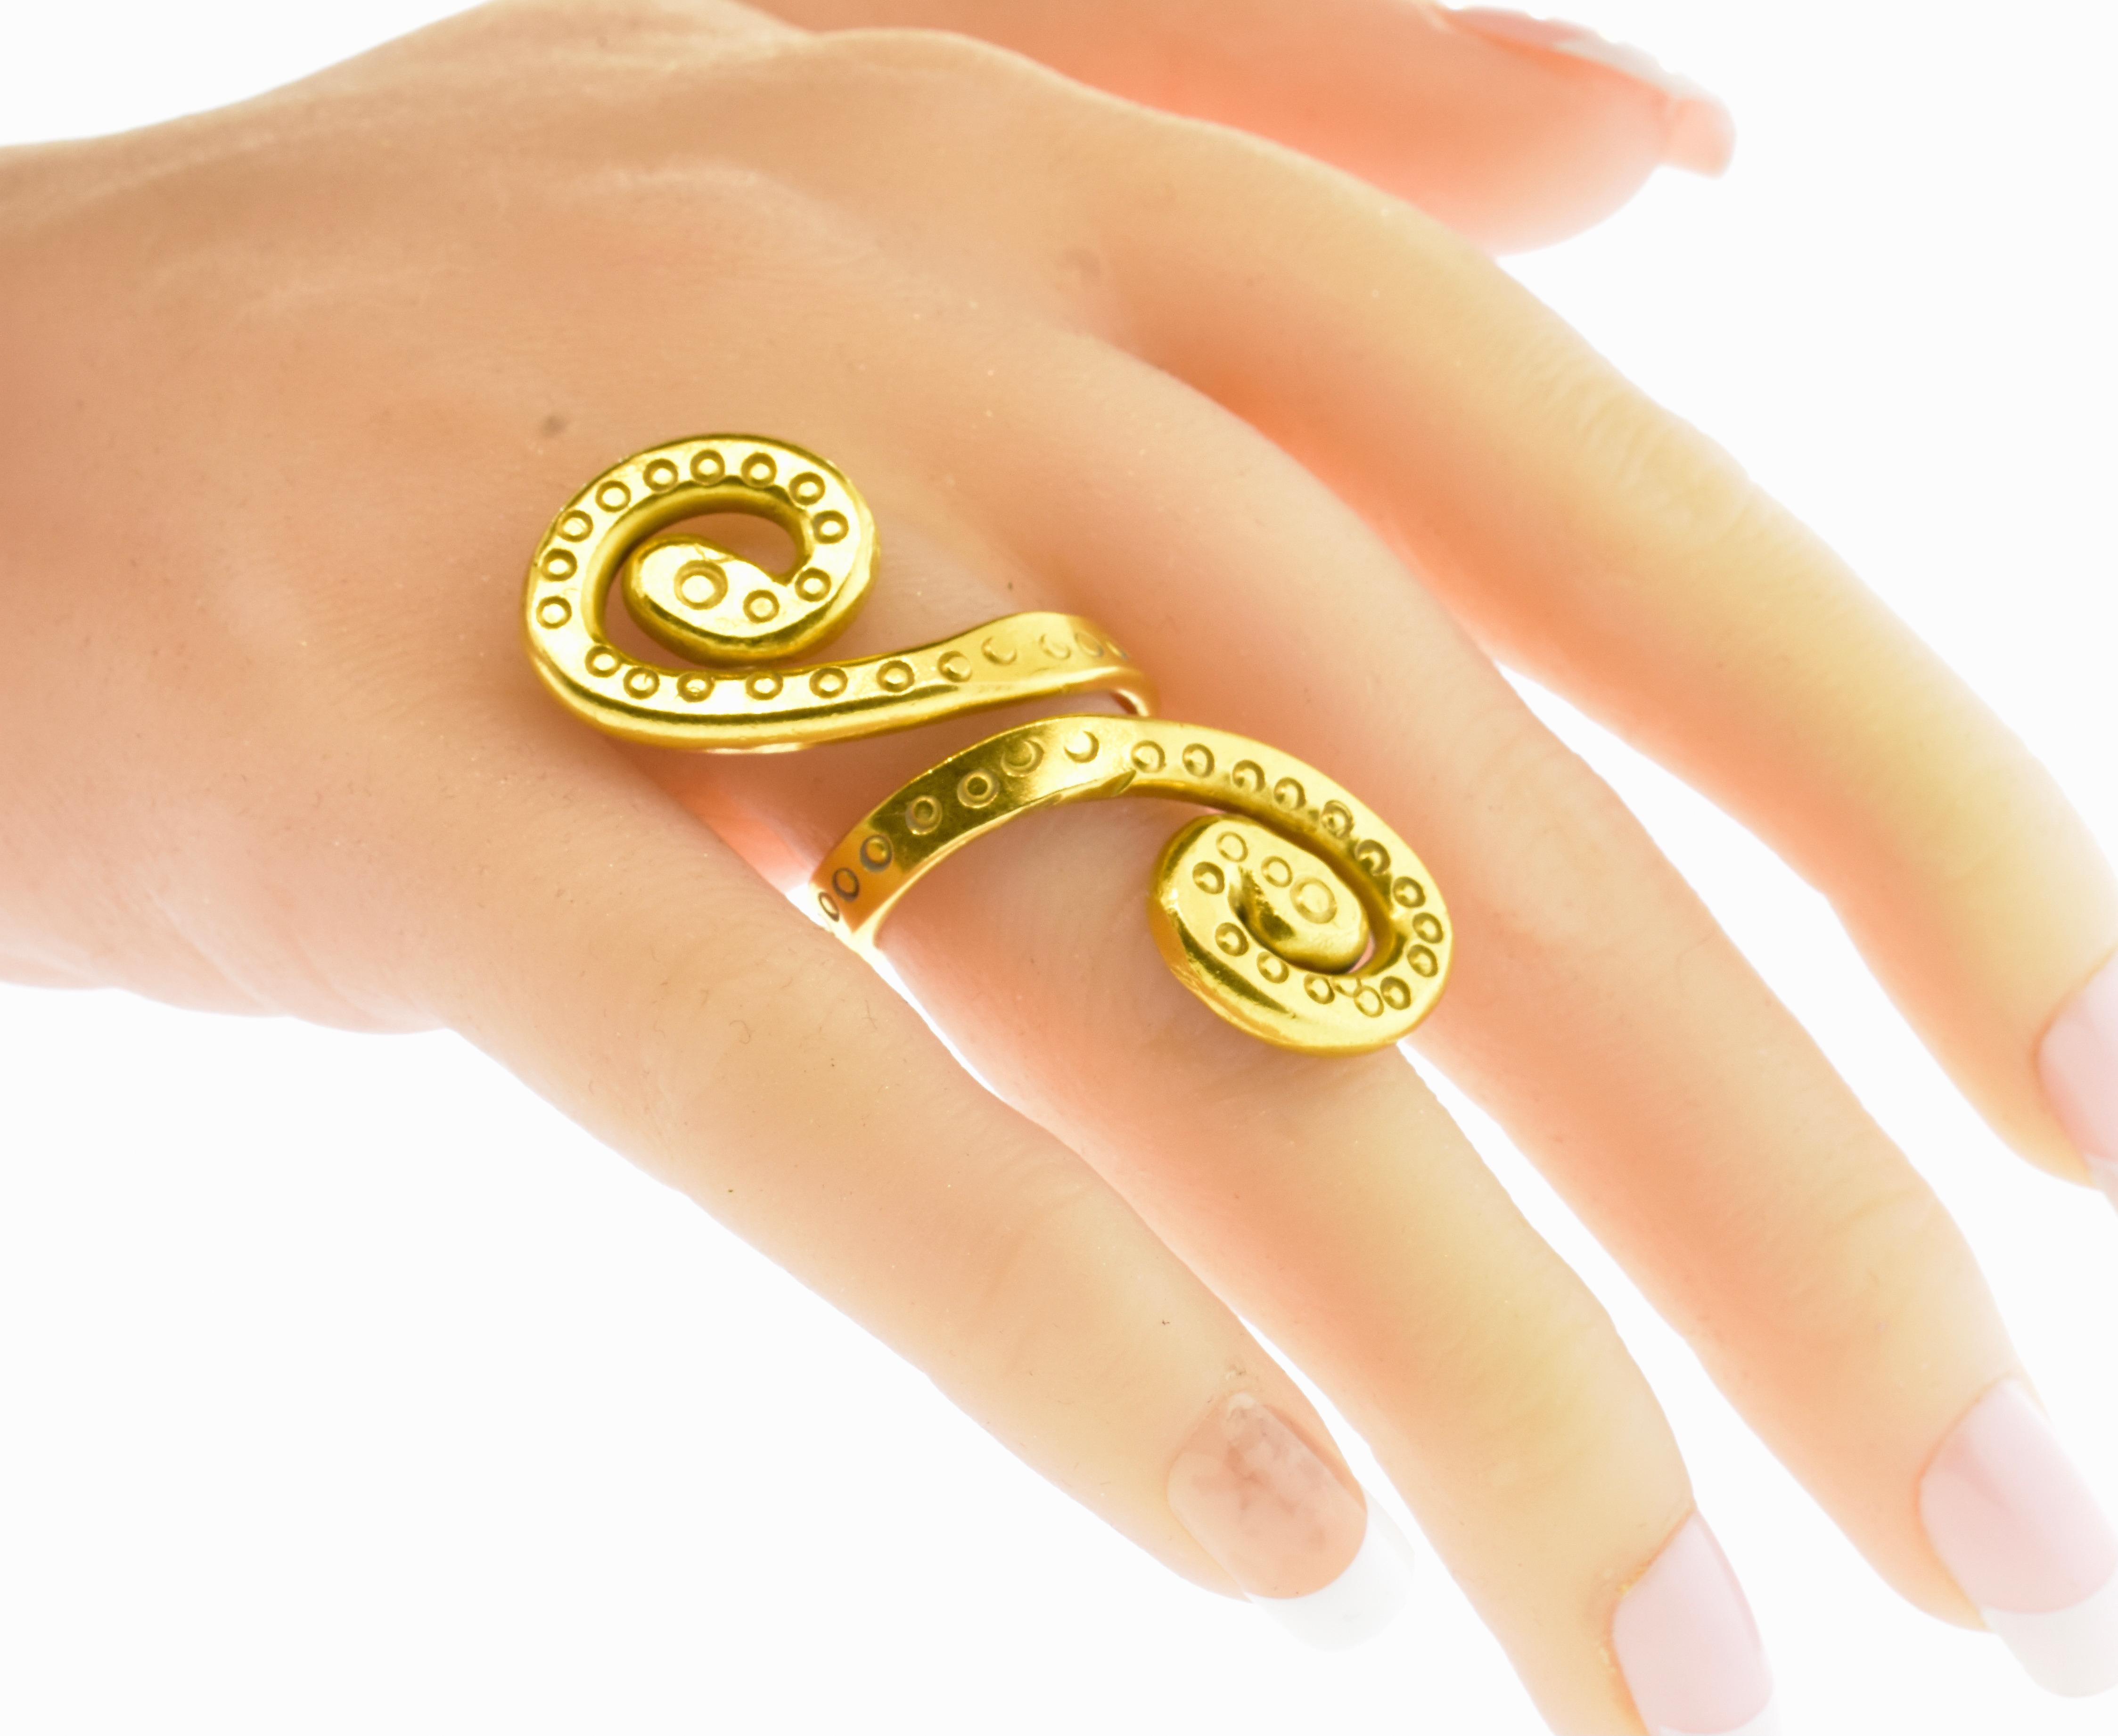 Jean Mahie yellow gold heavy one of a kind ring with a double snake motif.  Just over 2 inches in length, this solid 22k ring weighs 35.7 grams and is in fine condition.   It is a size 8 and can be resized.  The ring is signed on the shank along